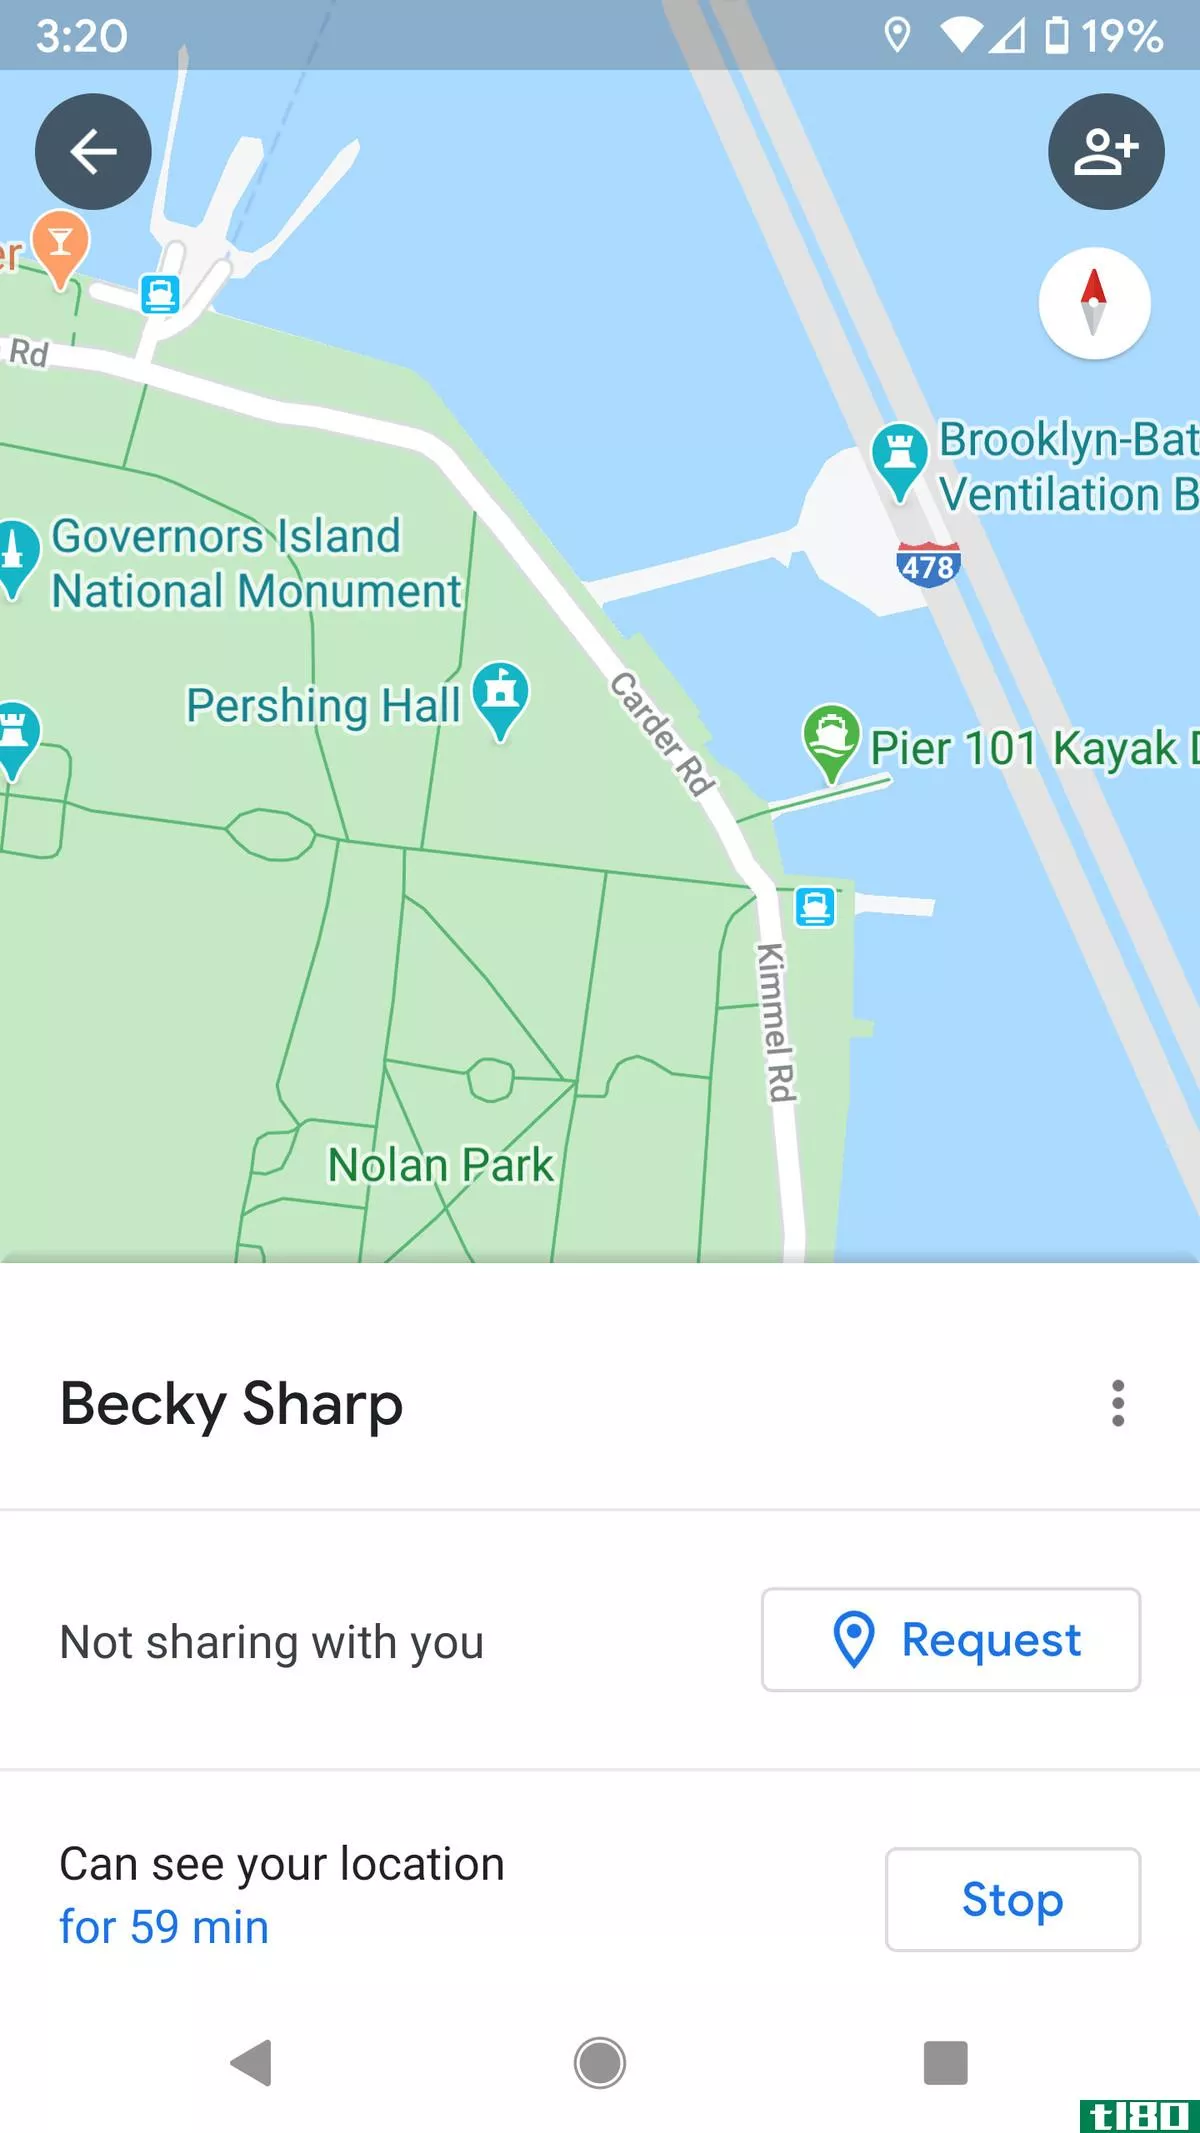 Tap on the name to stop the location sharing.